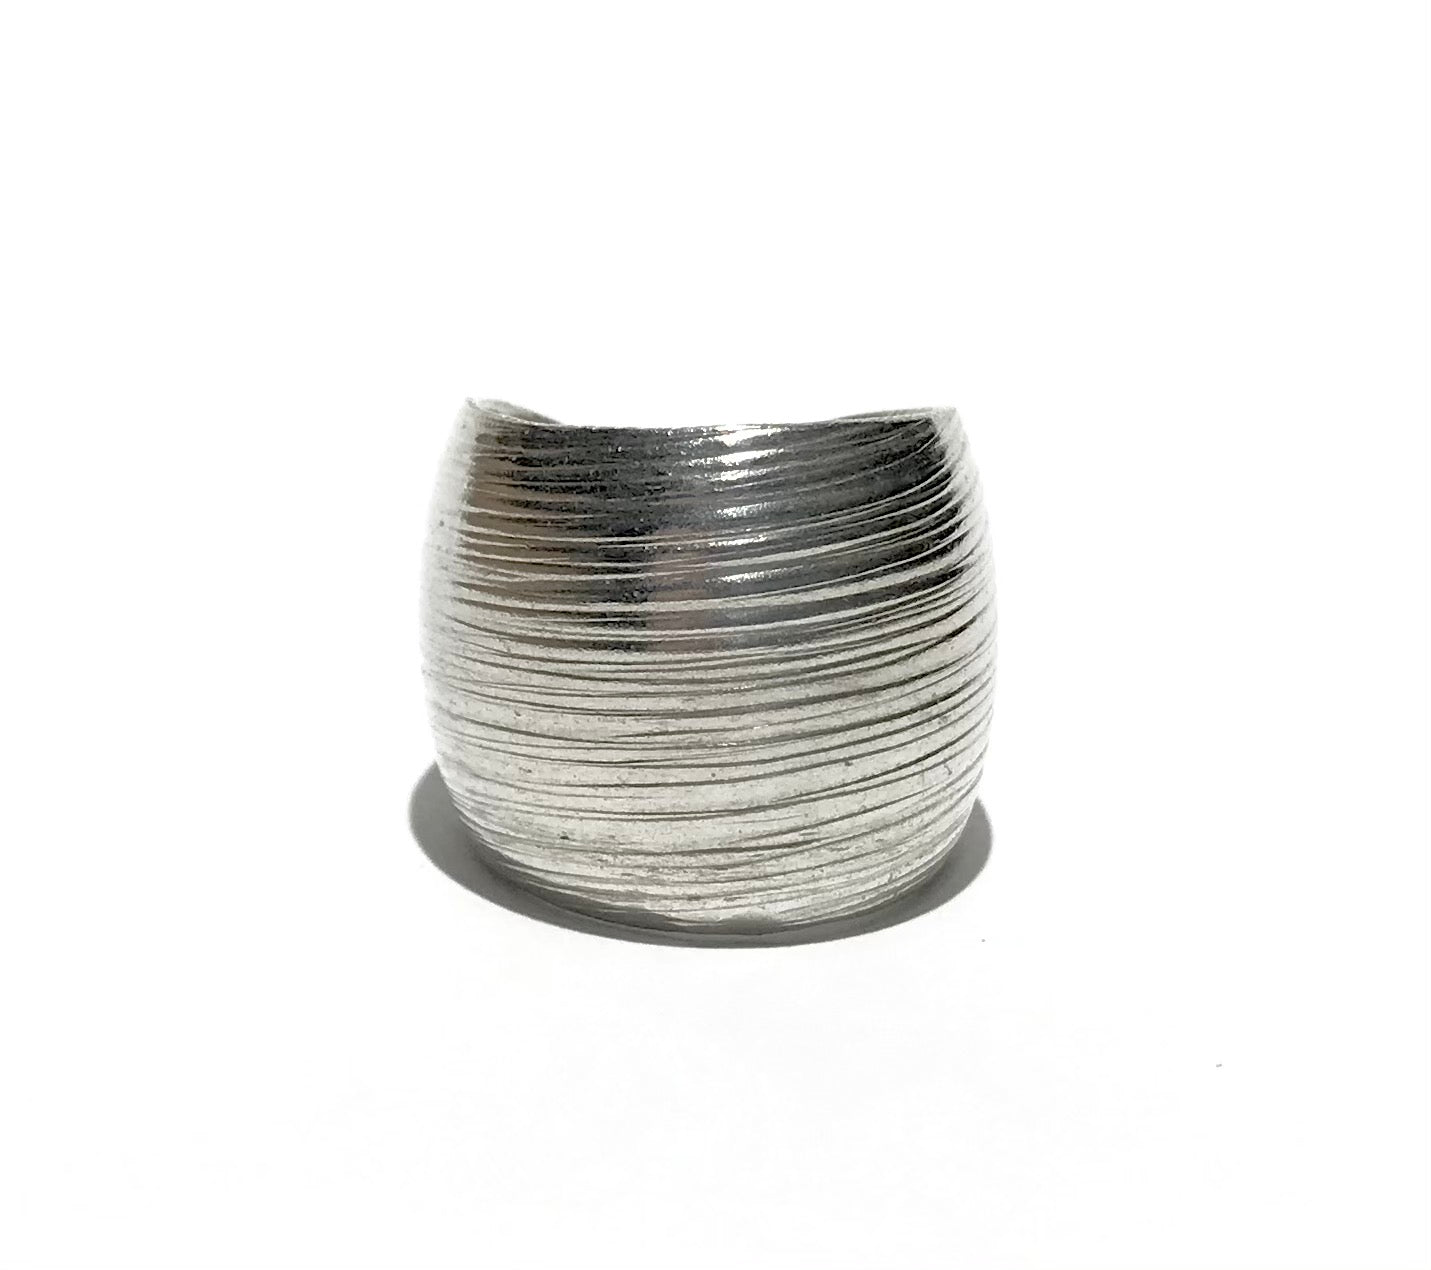 Thai Hill Tribe Silver Brushed Ring